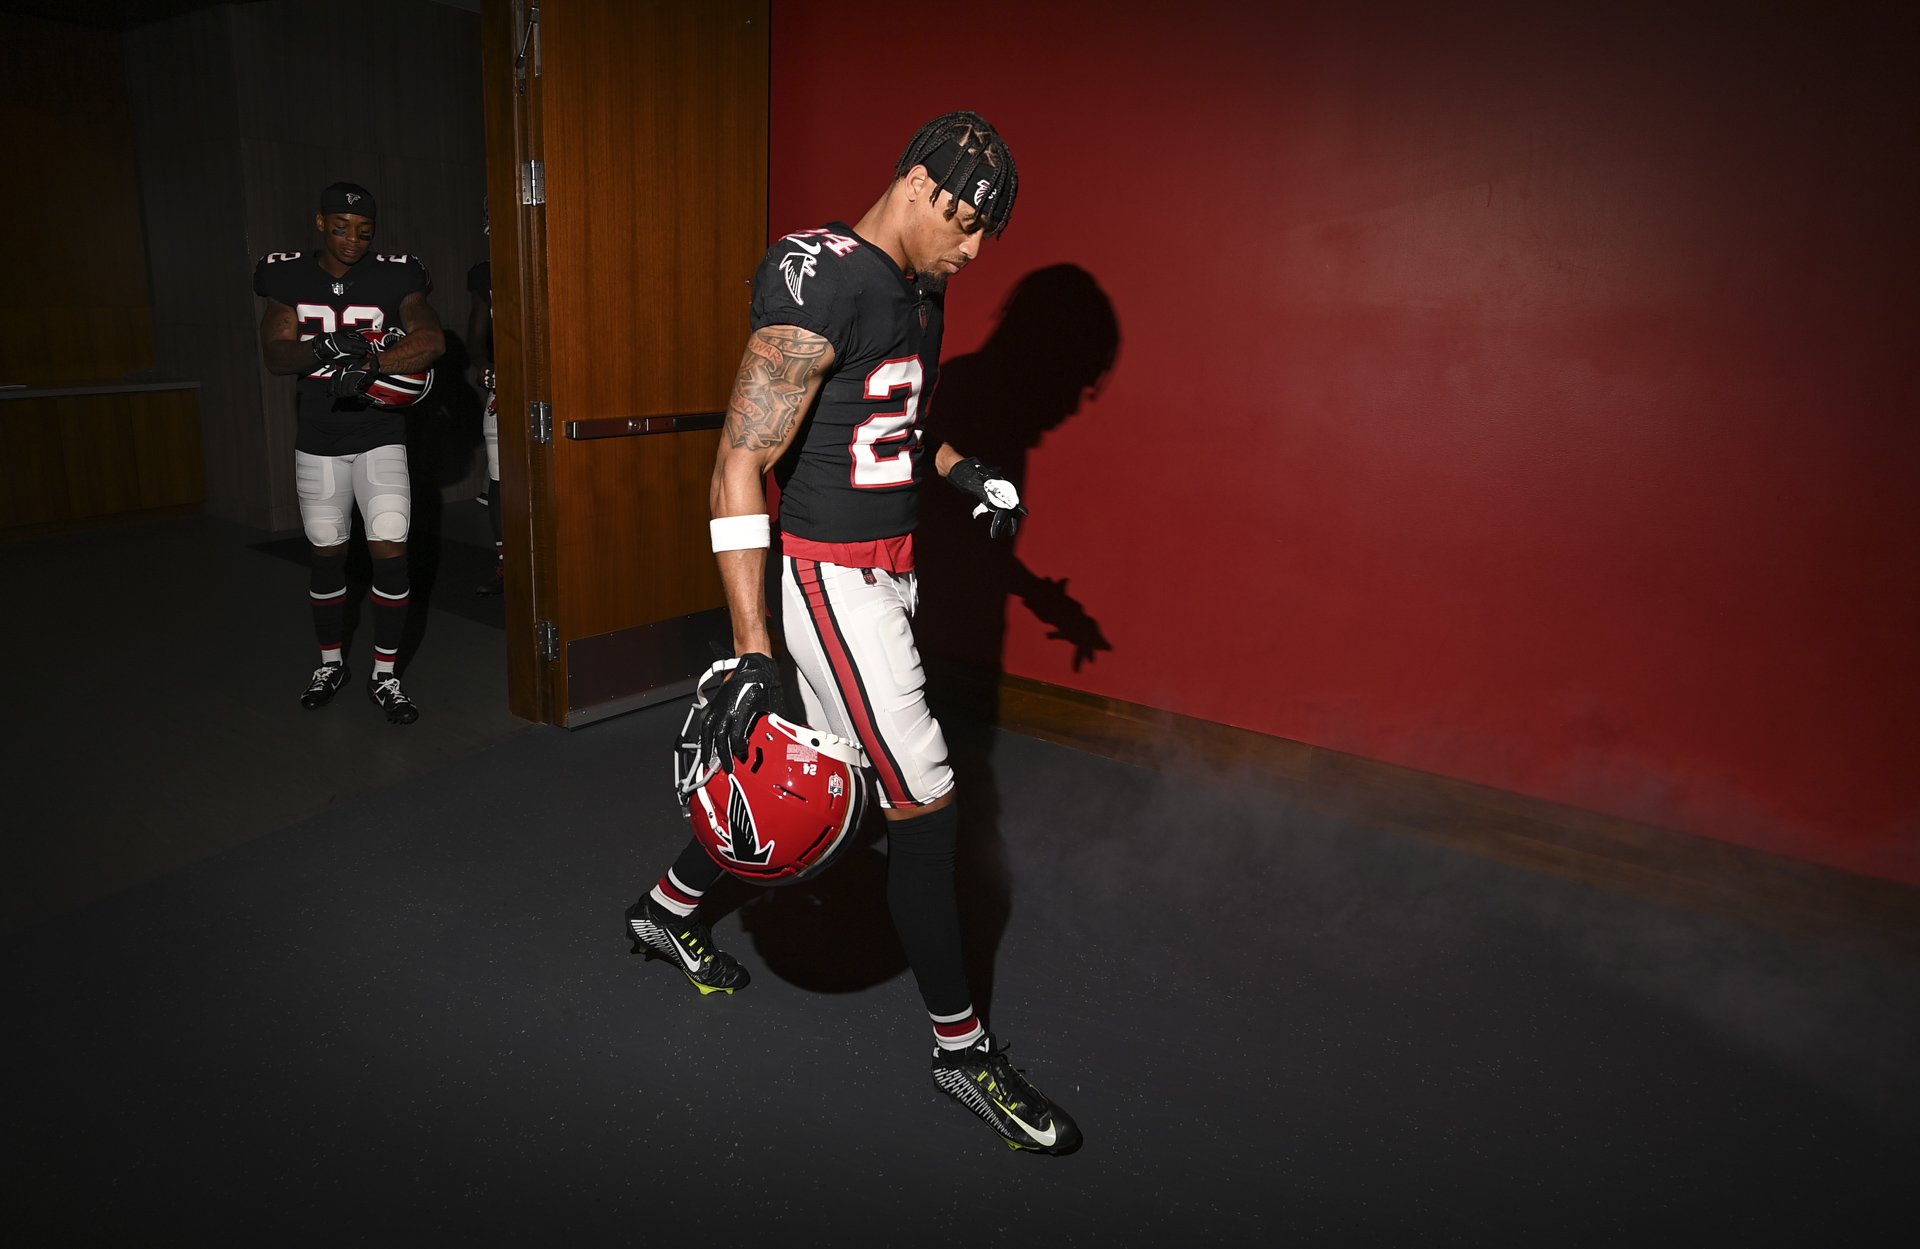  Atlanta Falcons cornerback A.J. Terrell #24 prepares to take the field prior to the game against the Pittsburgh Steelers at Mercedes-Benz Stadium in Atlanta, Georgia on Sunday, December 4, 2022. (Photo by Shanna Lockwood/Atlanta Falcons) 